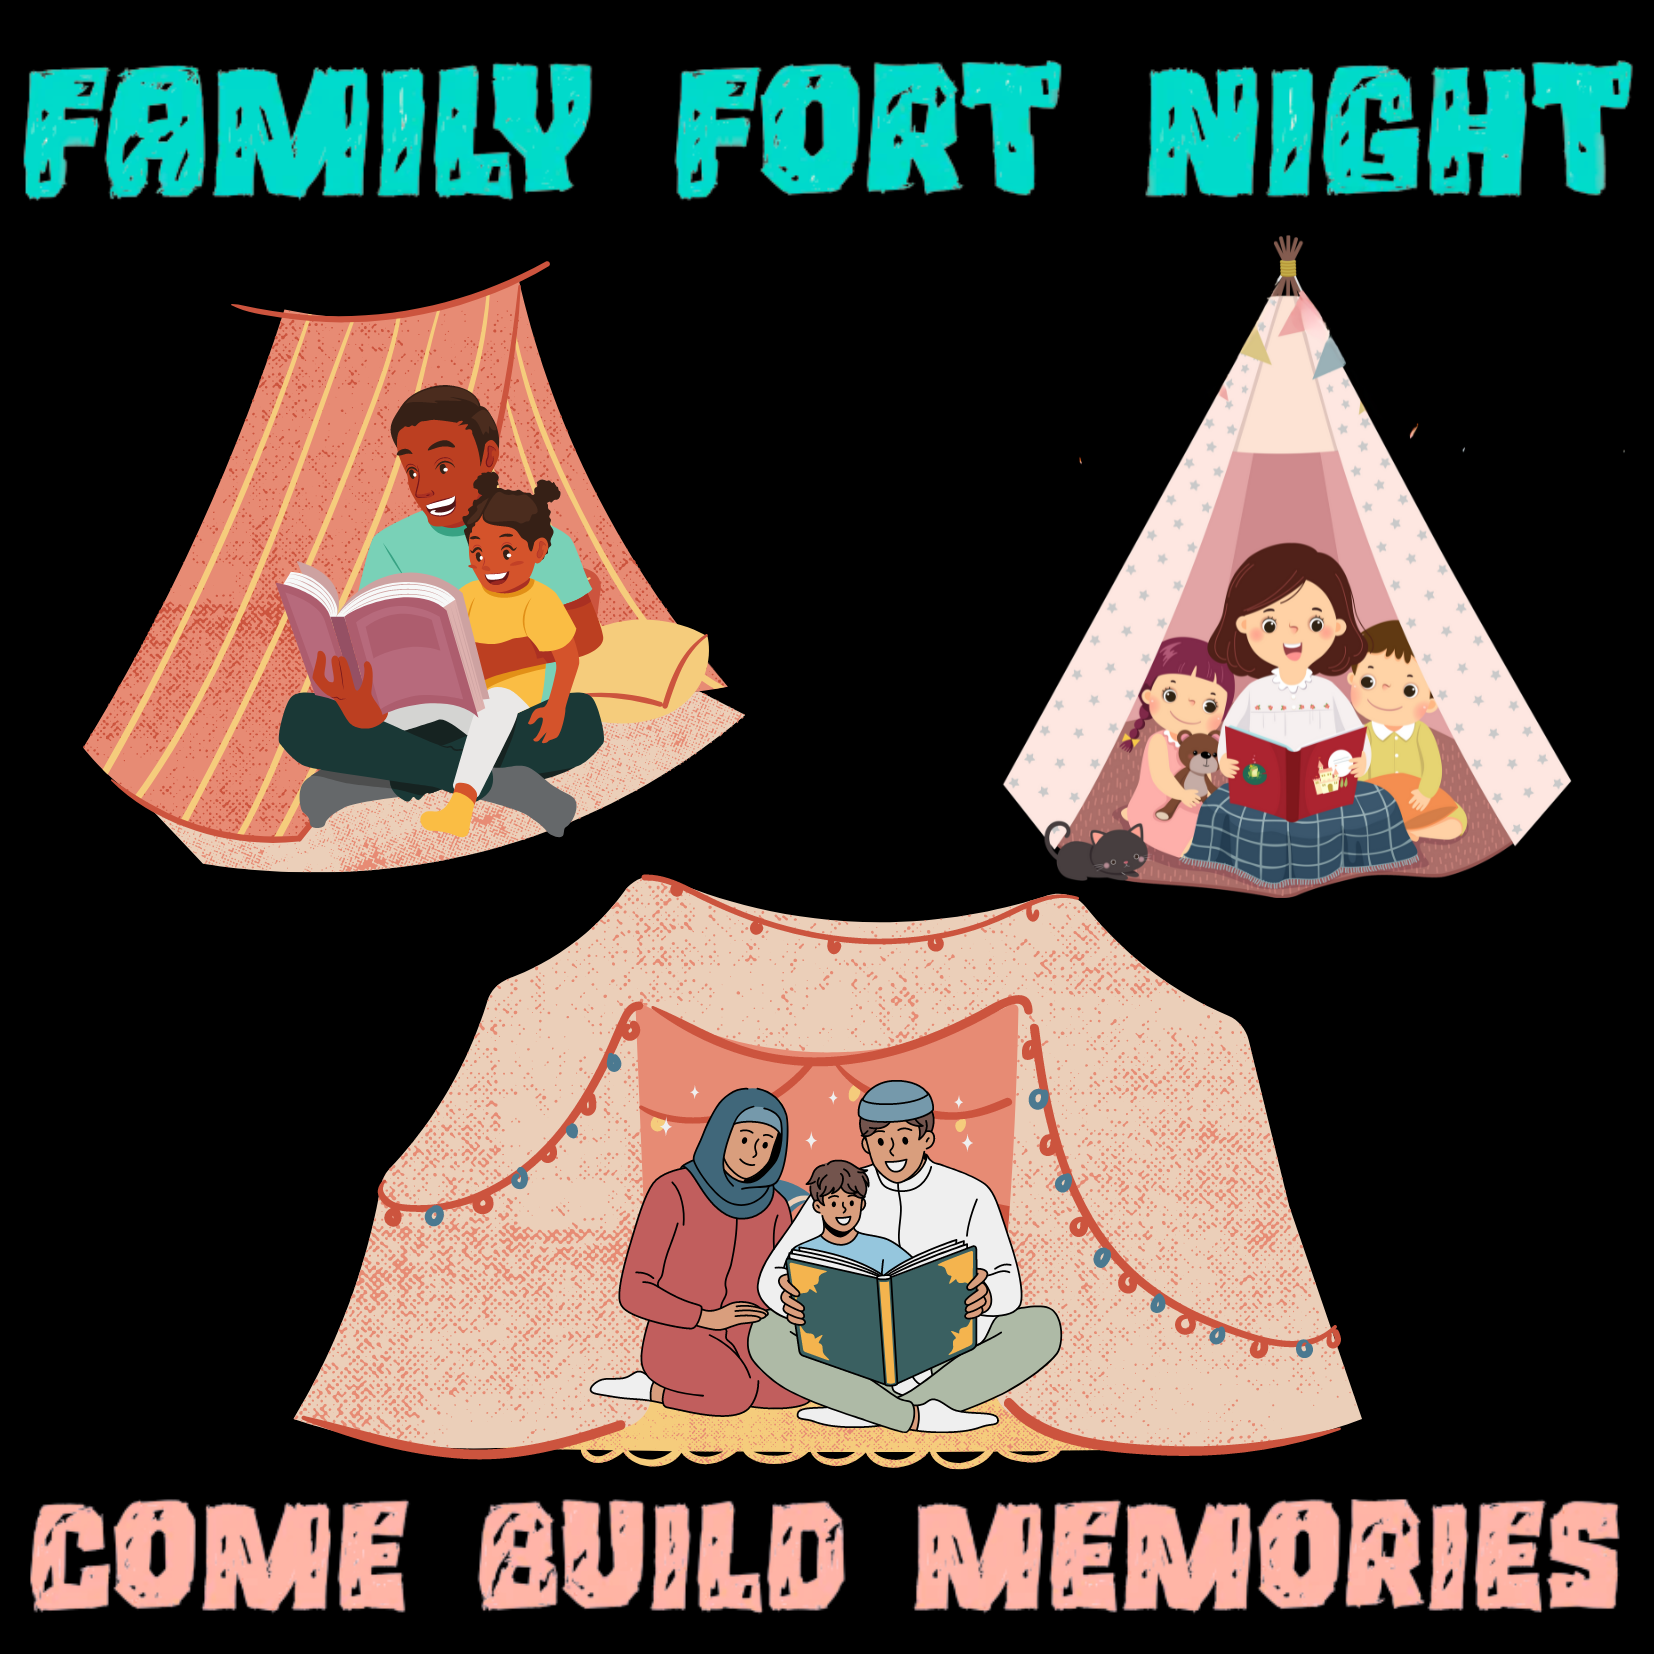 Black background with blanket forts and families reading; text in blue says Family Fort Night and text in brown says Come Build Memories